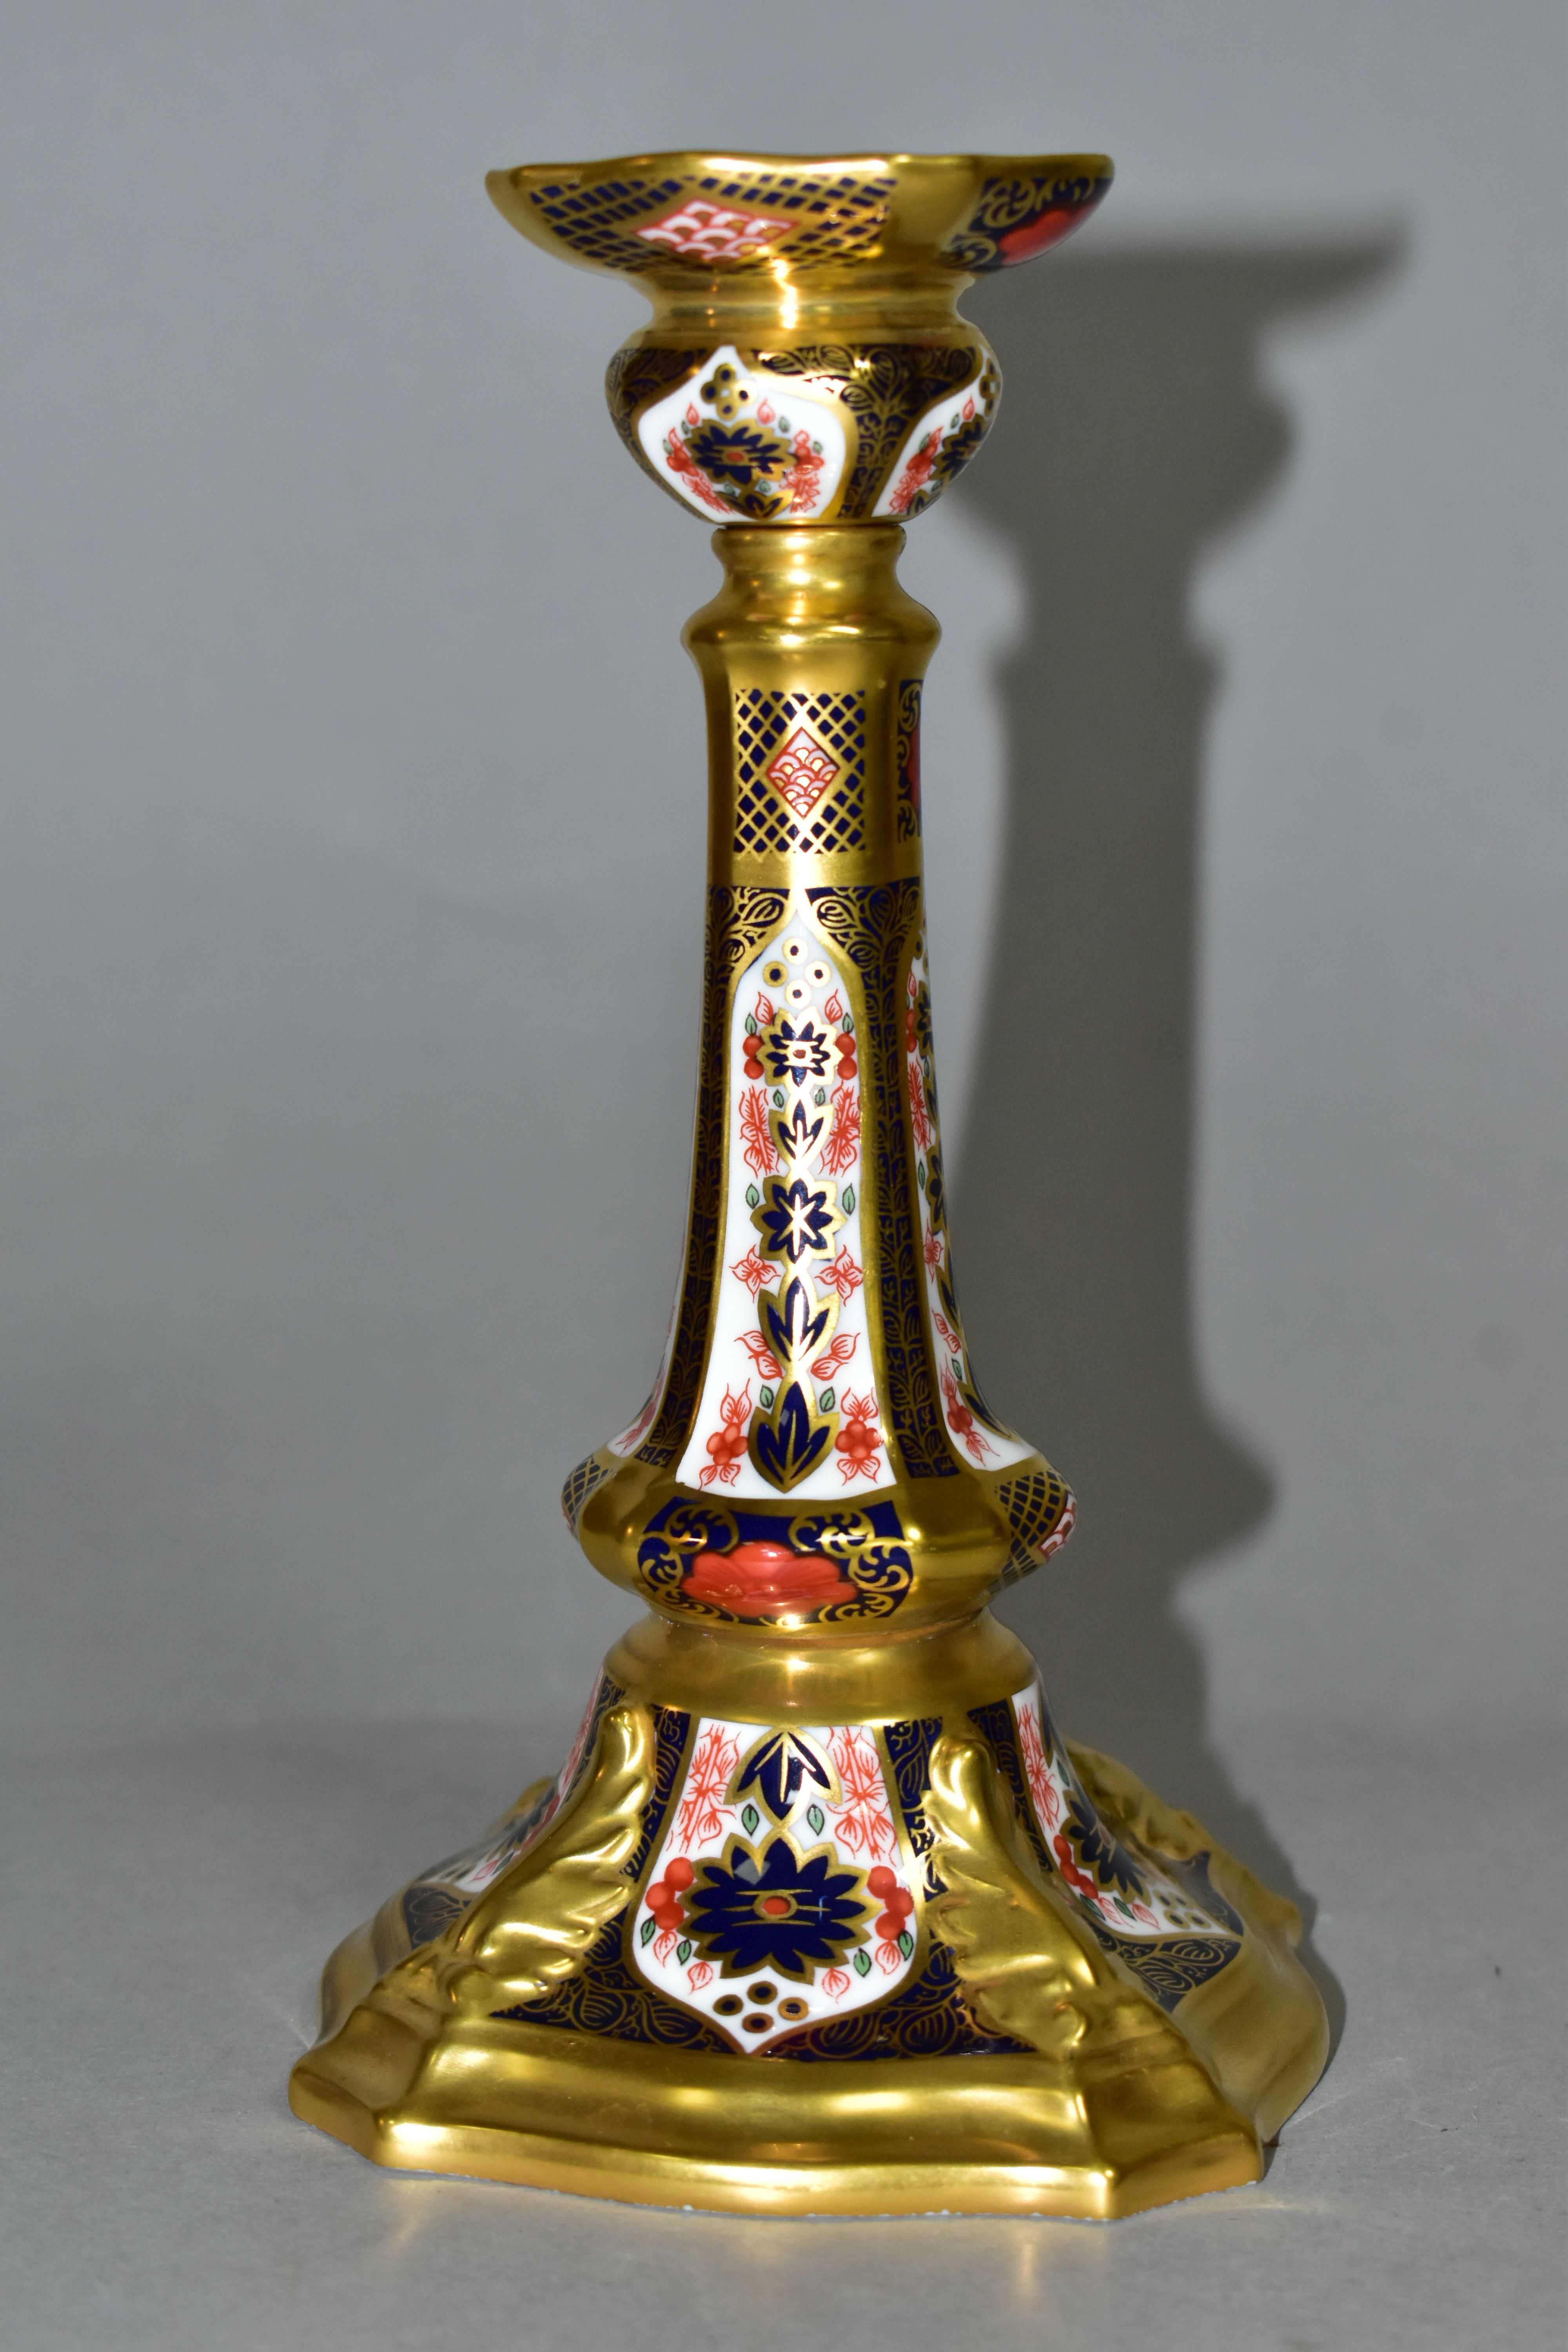 A ROYAL CROWN DERBY OLD IMARI 1128 SOLID GOLD BAND CASTLETON CANDLESTICK, heavily gilded with leaf